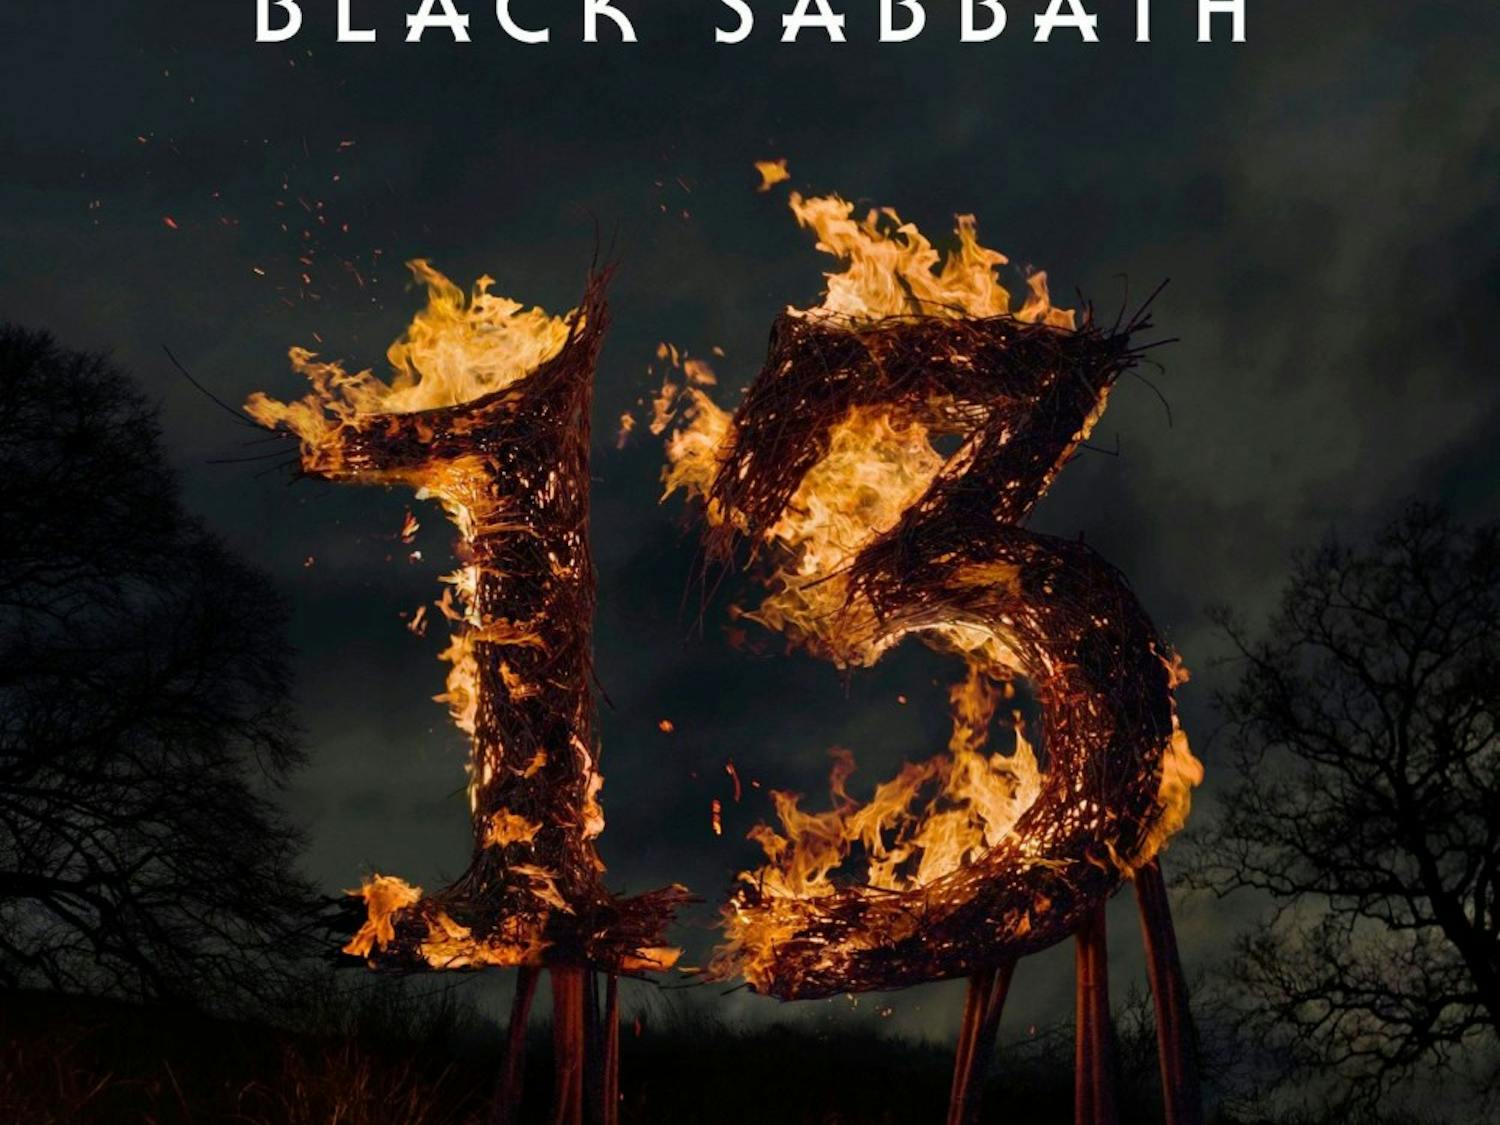 Black Sabbath's&nbsp;most recent album came following a 16-year breakup and hiatus. It&nbsp;was released in 2013 – two years after the band’s reformation in 2011.&nbsp;